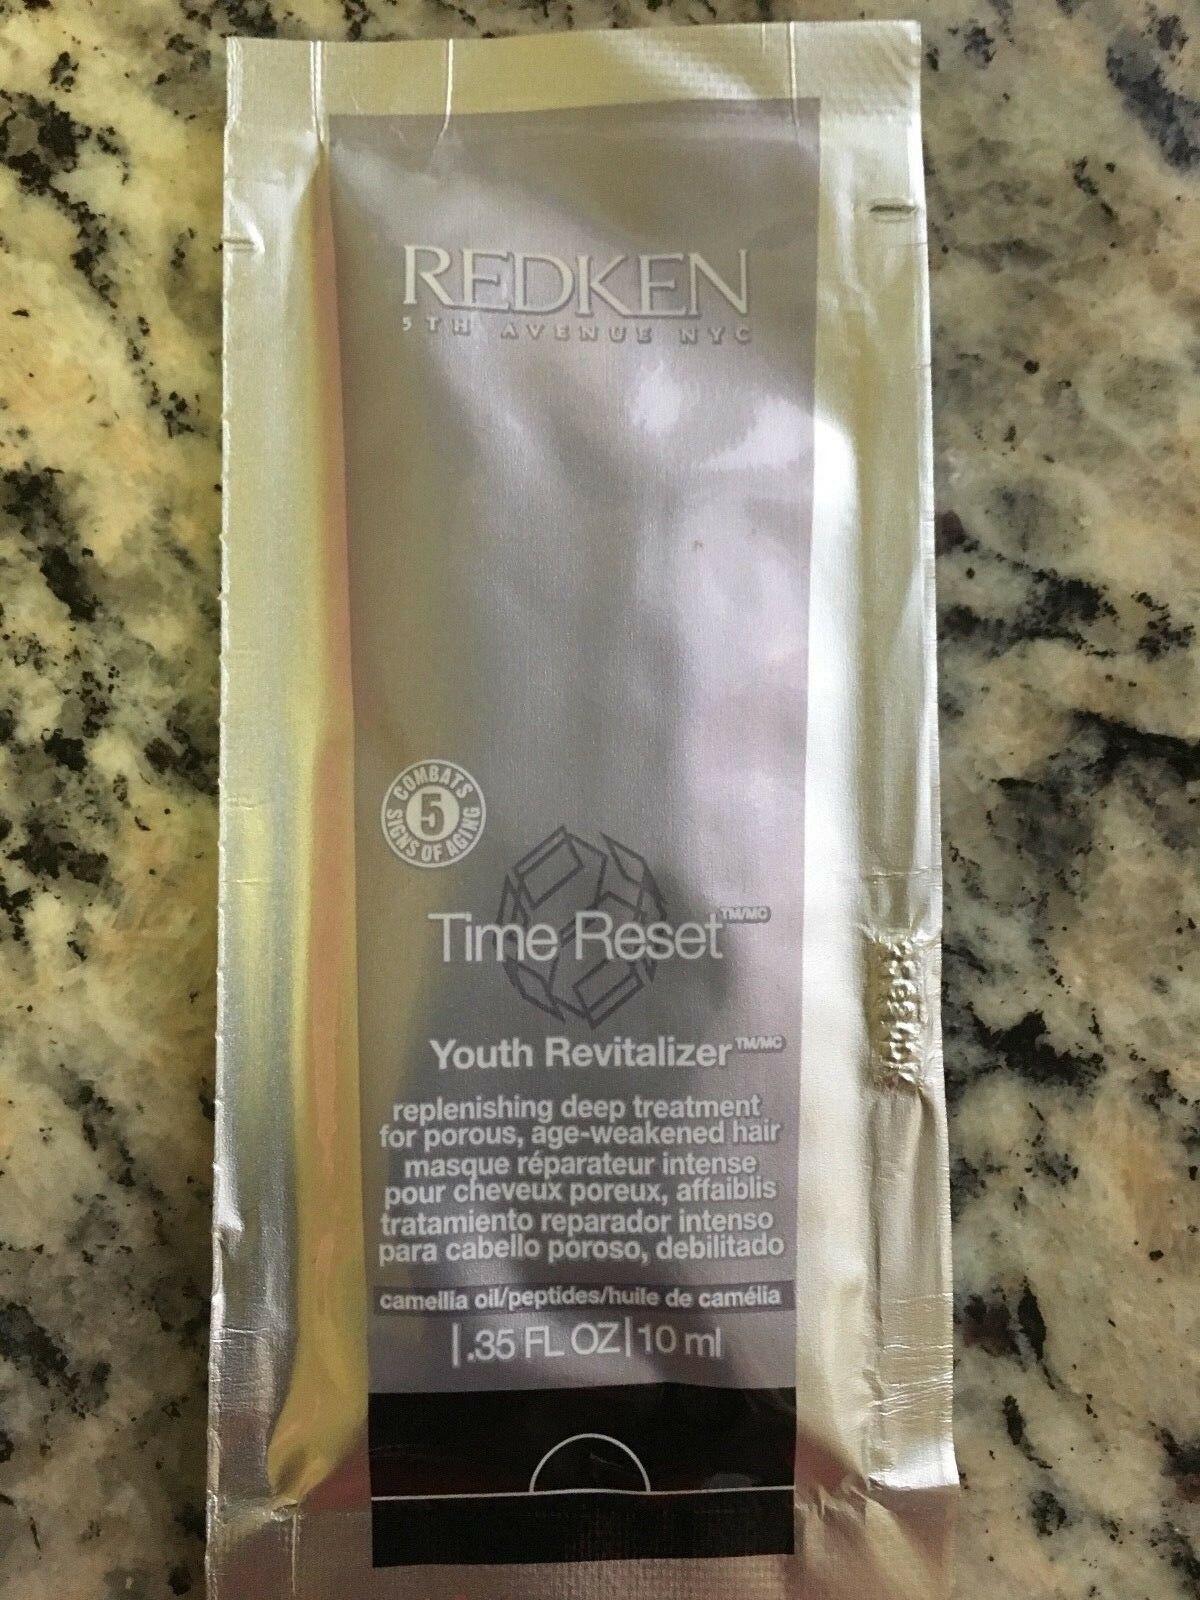 100 Redken Time Reset Youth Revitalizer Travel Size .35oz  Each Packet